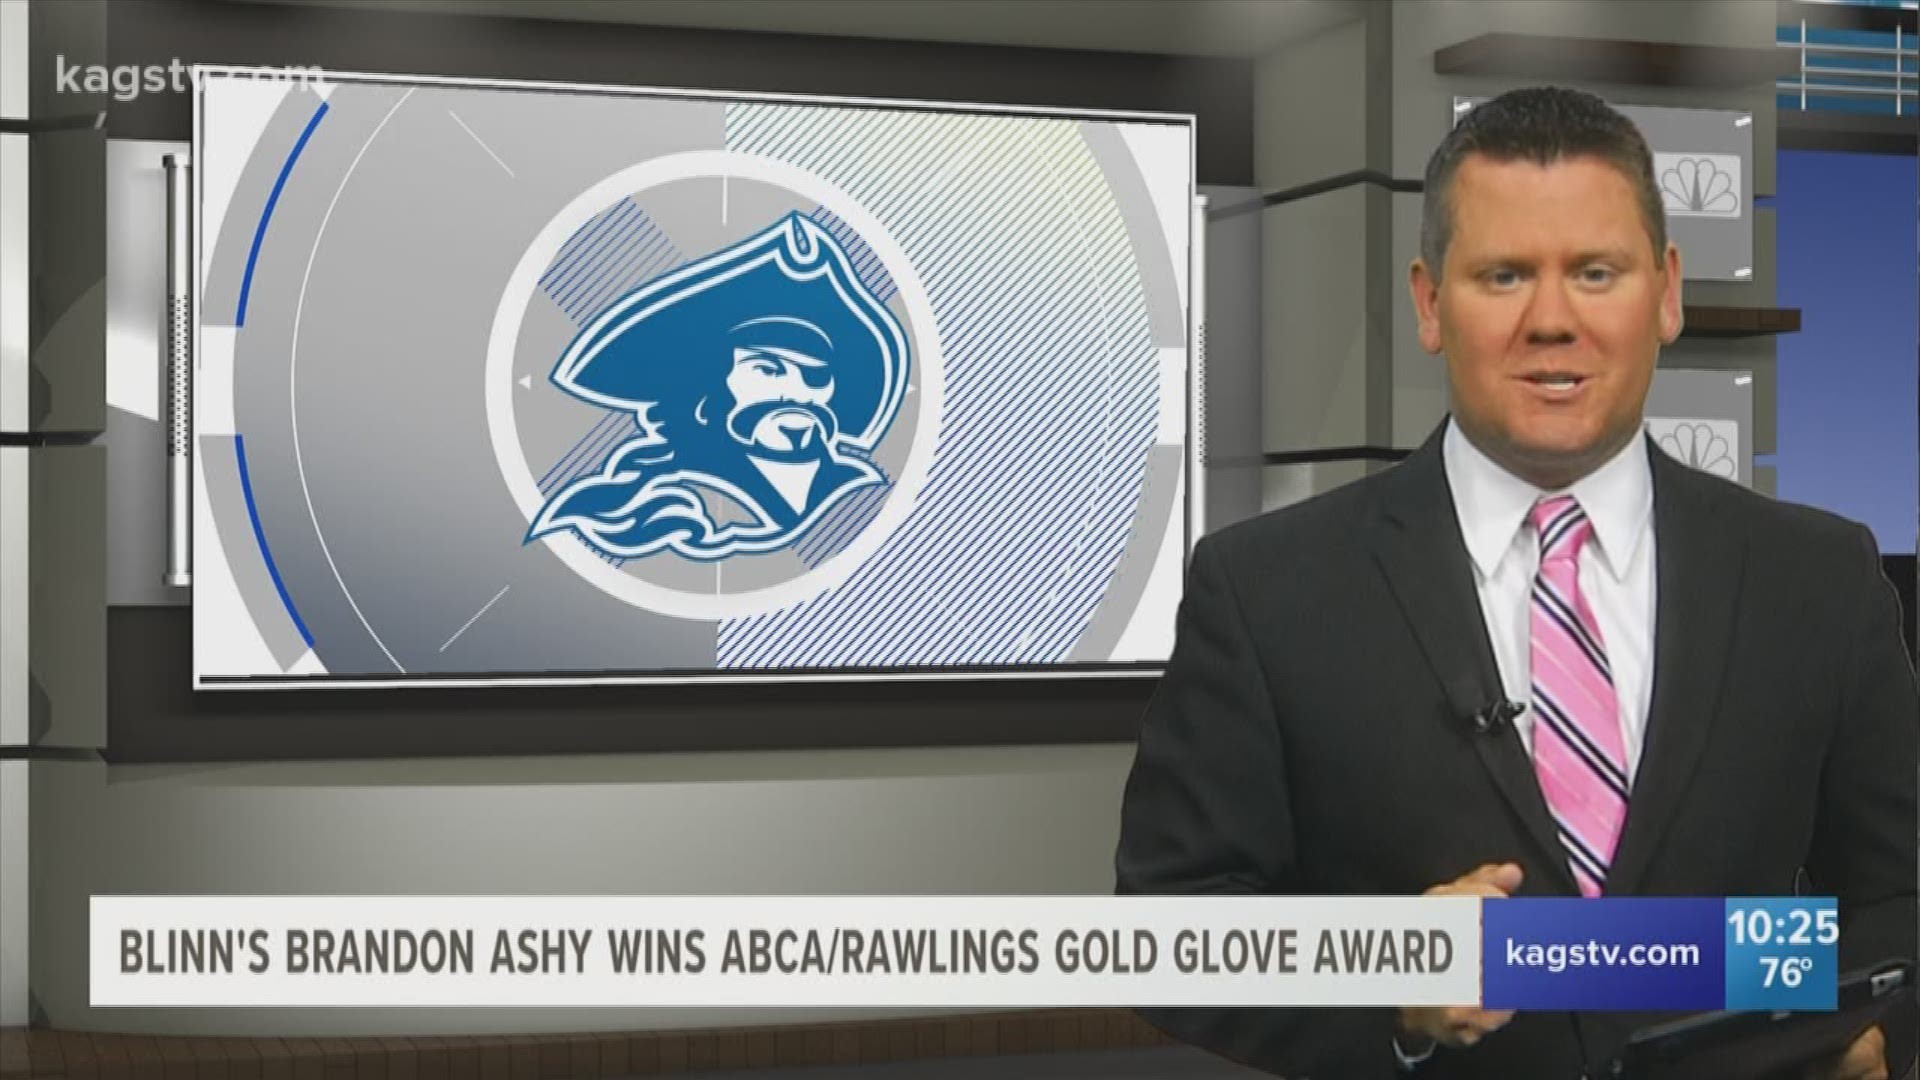 A Blinn standout has been rewarded for having one heck of a 2018 season. Buccaneer catcher Brandon Ashy is a Rawlings and AmericanBaseball Coaches Association Gold Glove Award winner.